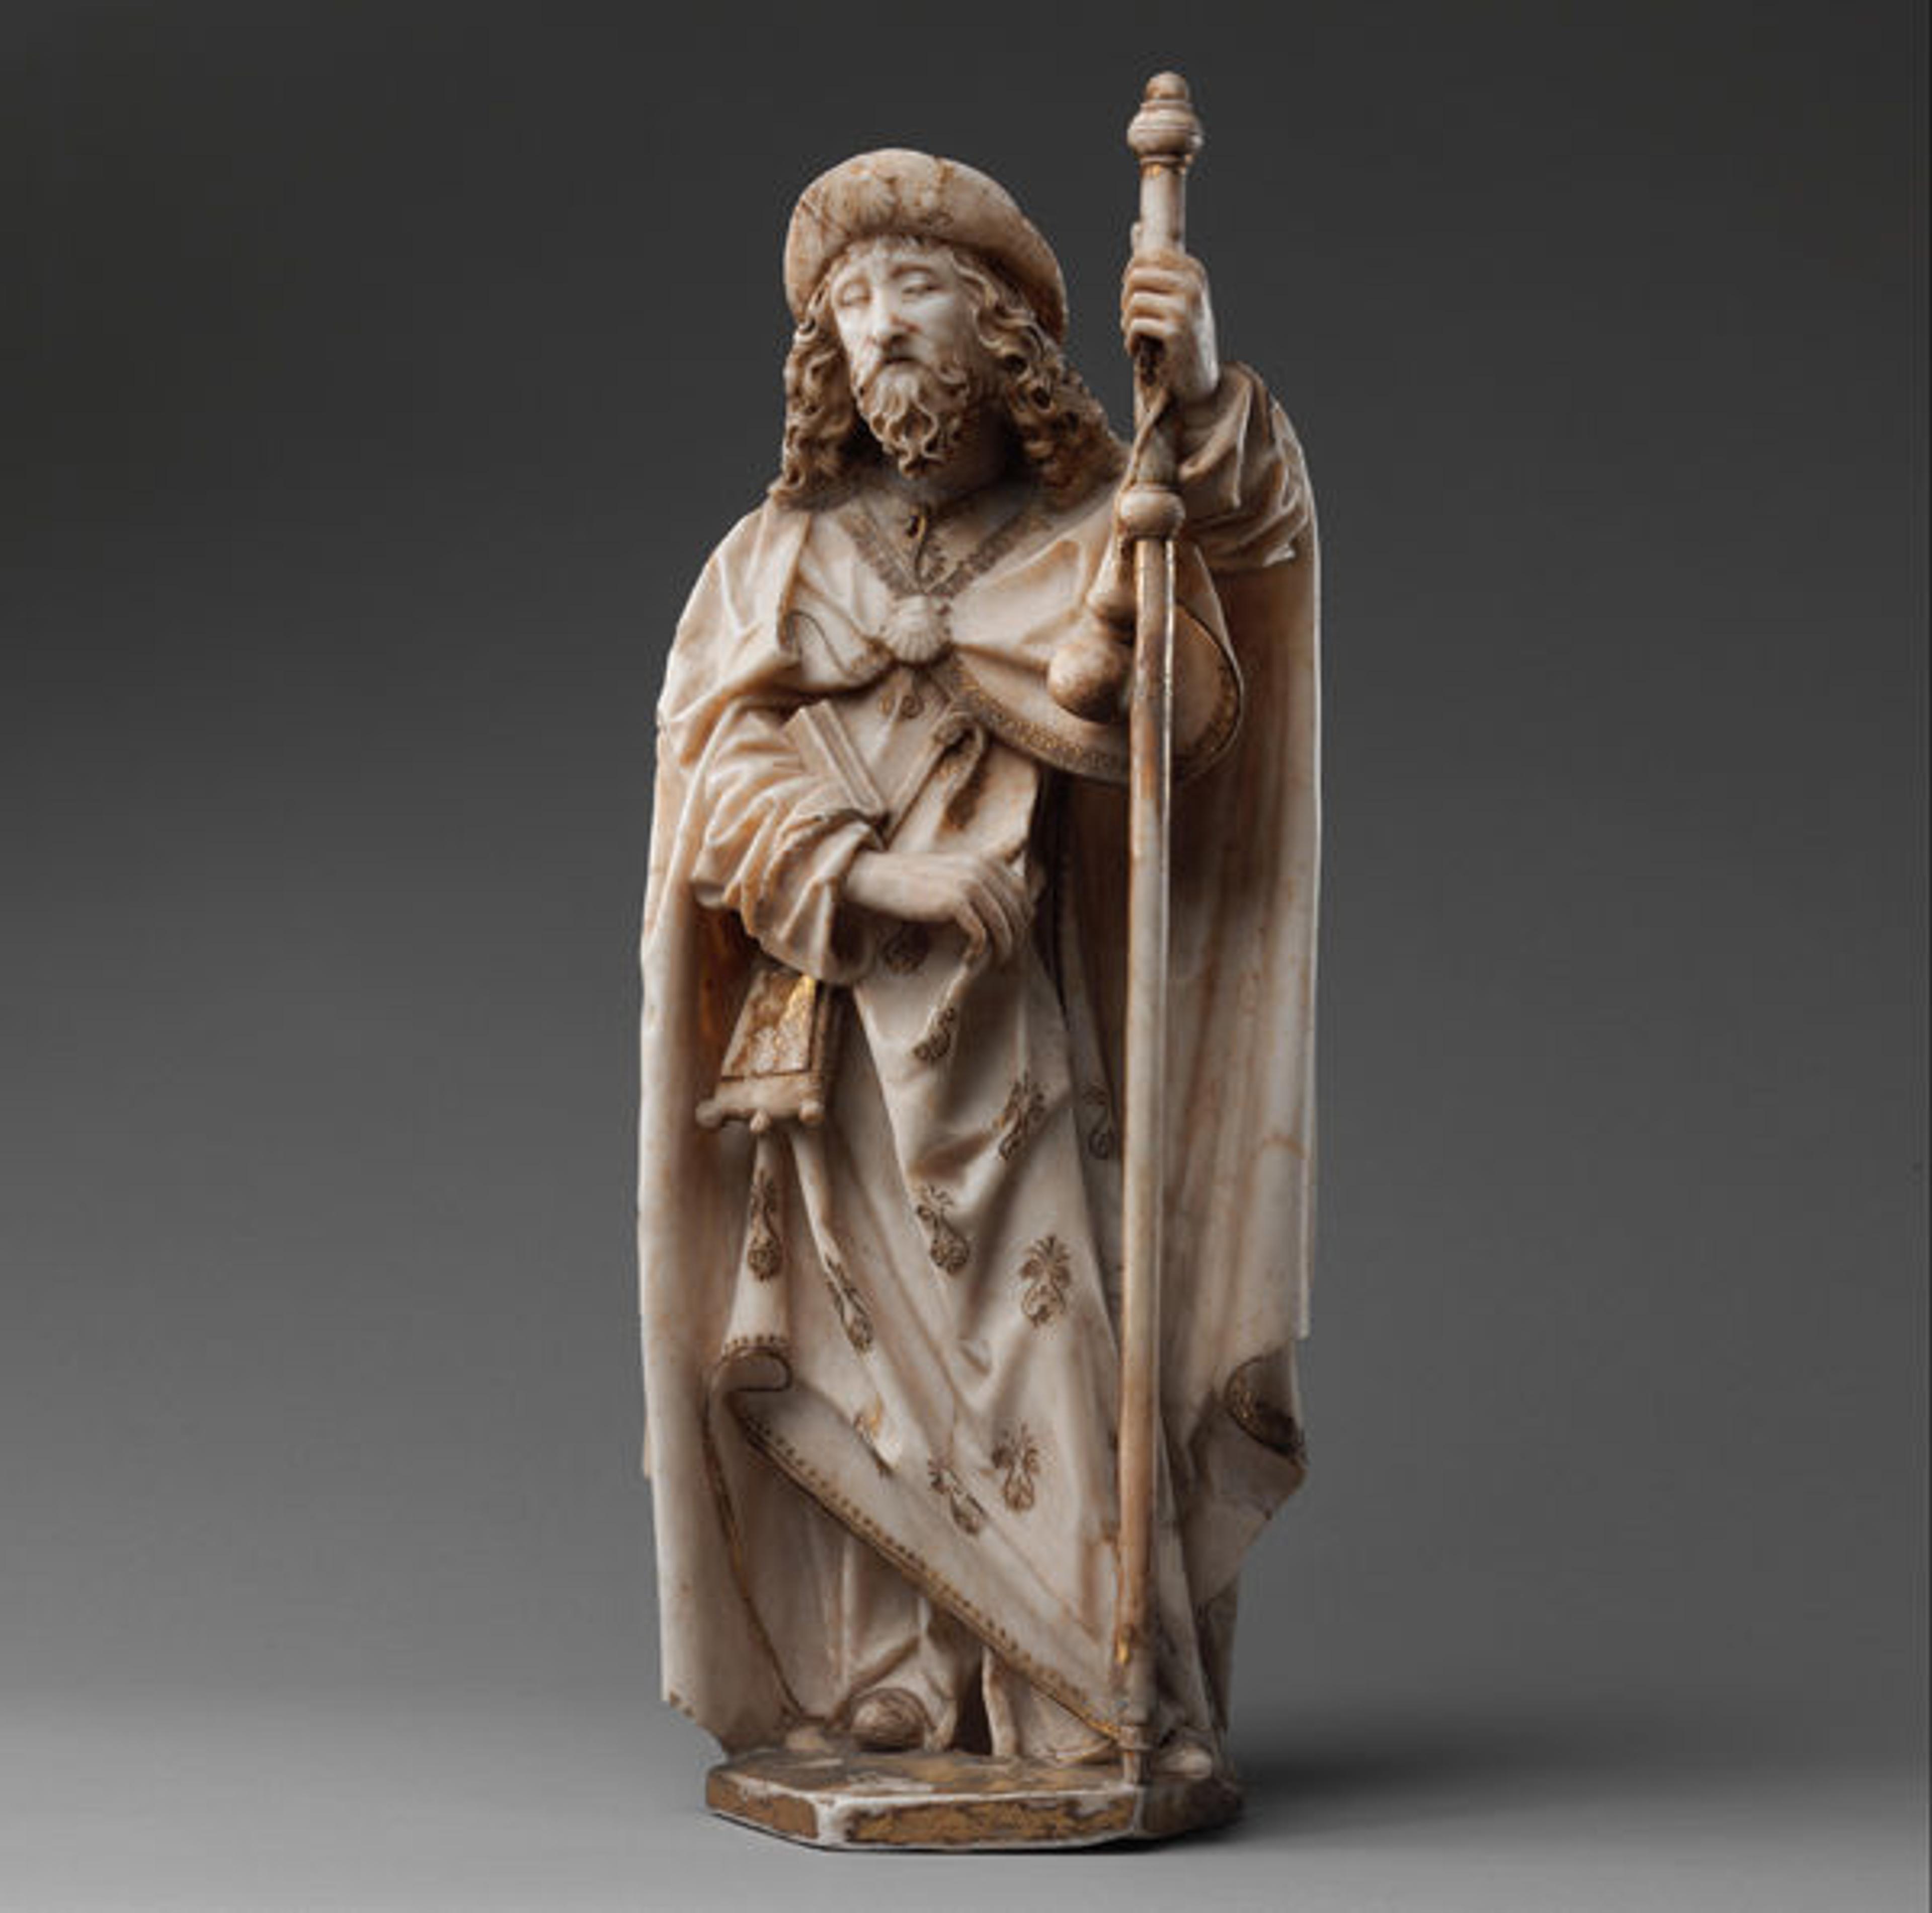 Gil de Siloe (Spanish, active 1475–1505). Saint James the Greater, ca. 1489–93. Made in Burgos, Castile-León, Spain. Spanish. Alabaster with paint and gilding; overall: 18 1/16 in. (45.9 cm). The Metropolitan Museum of Art, New York, The Cloisters Collection, 1969 (69.88)